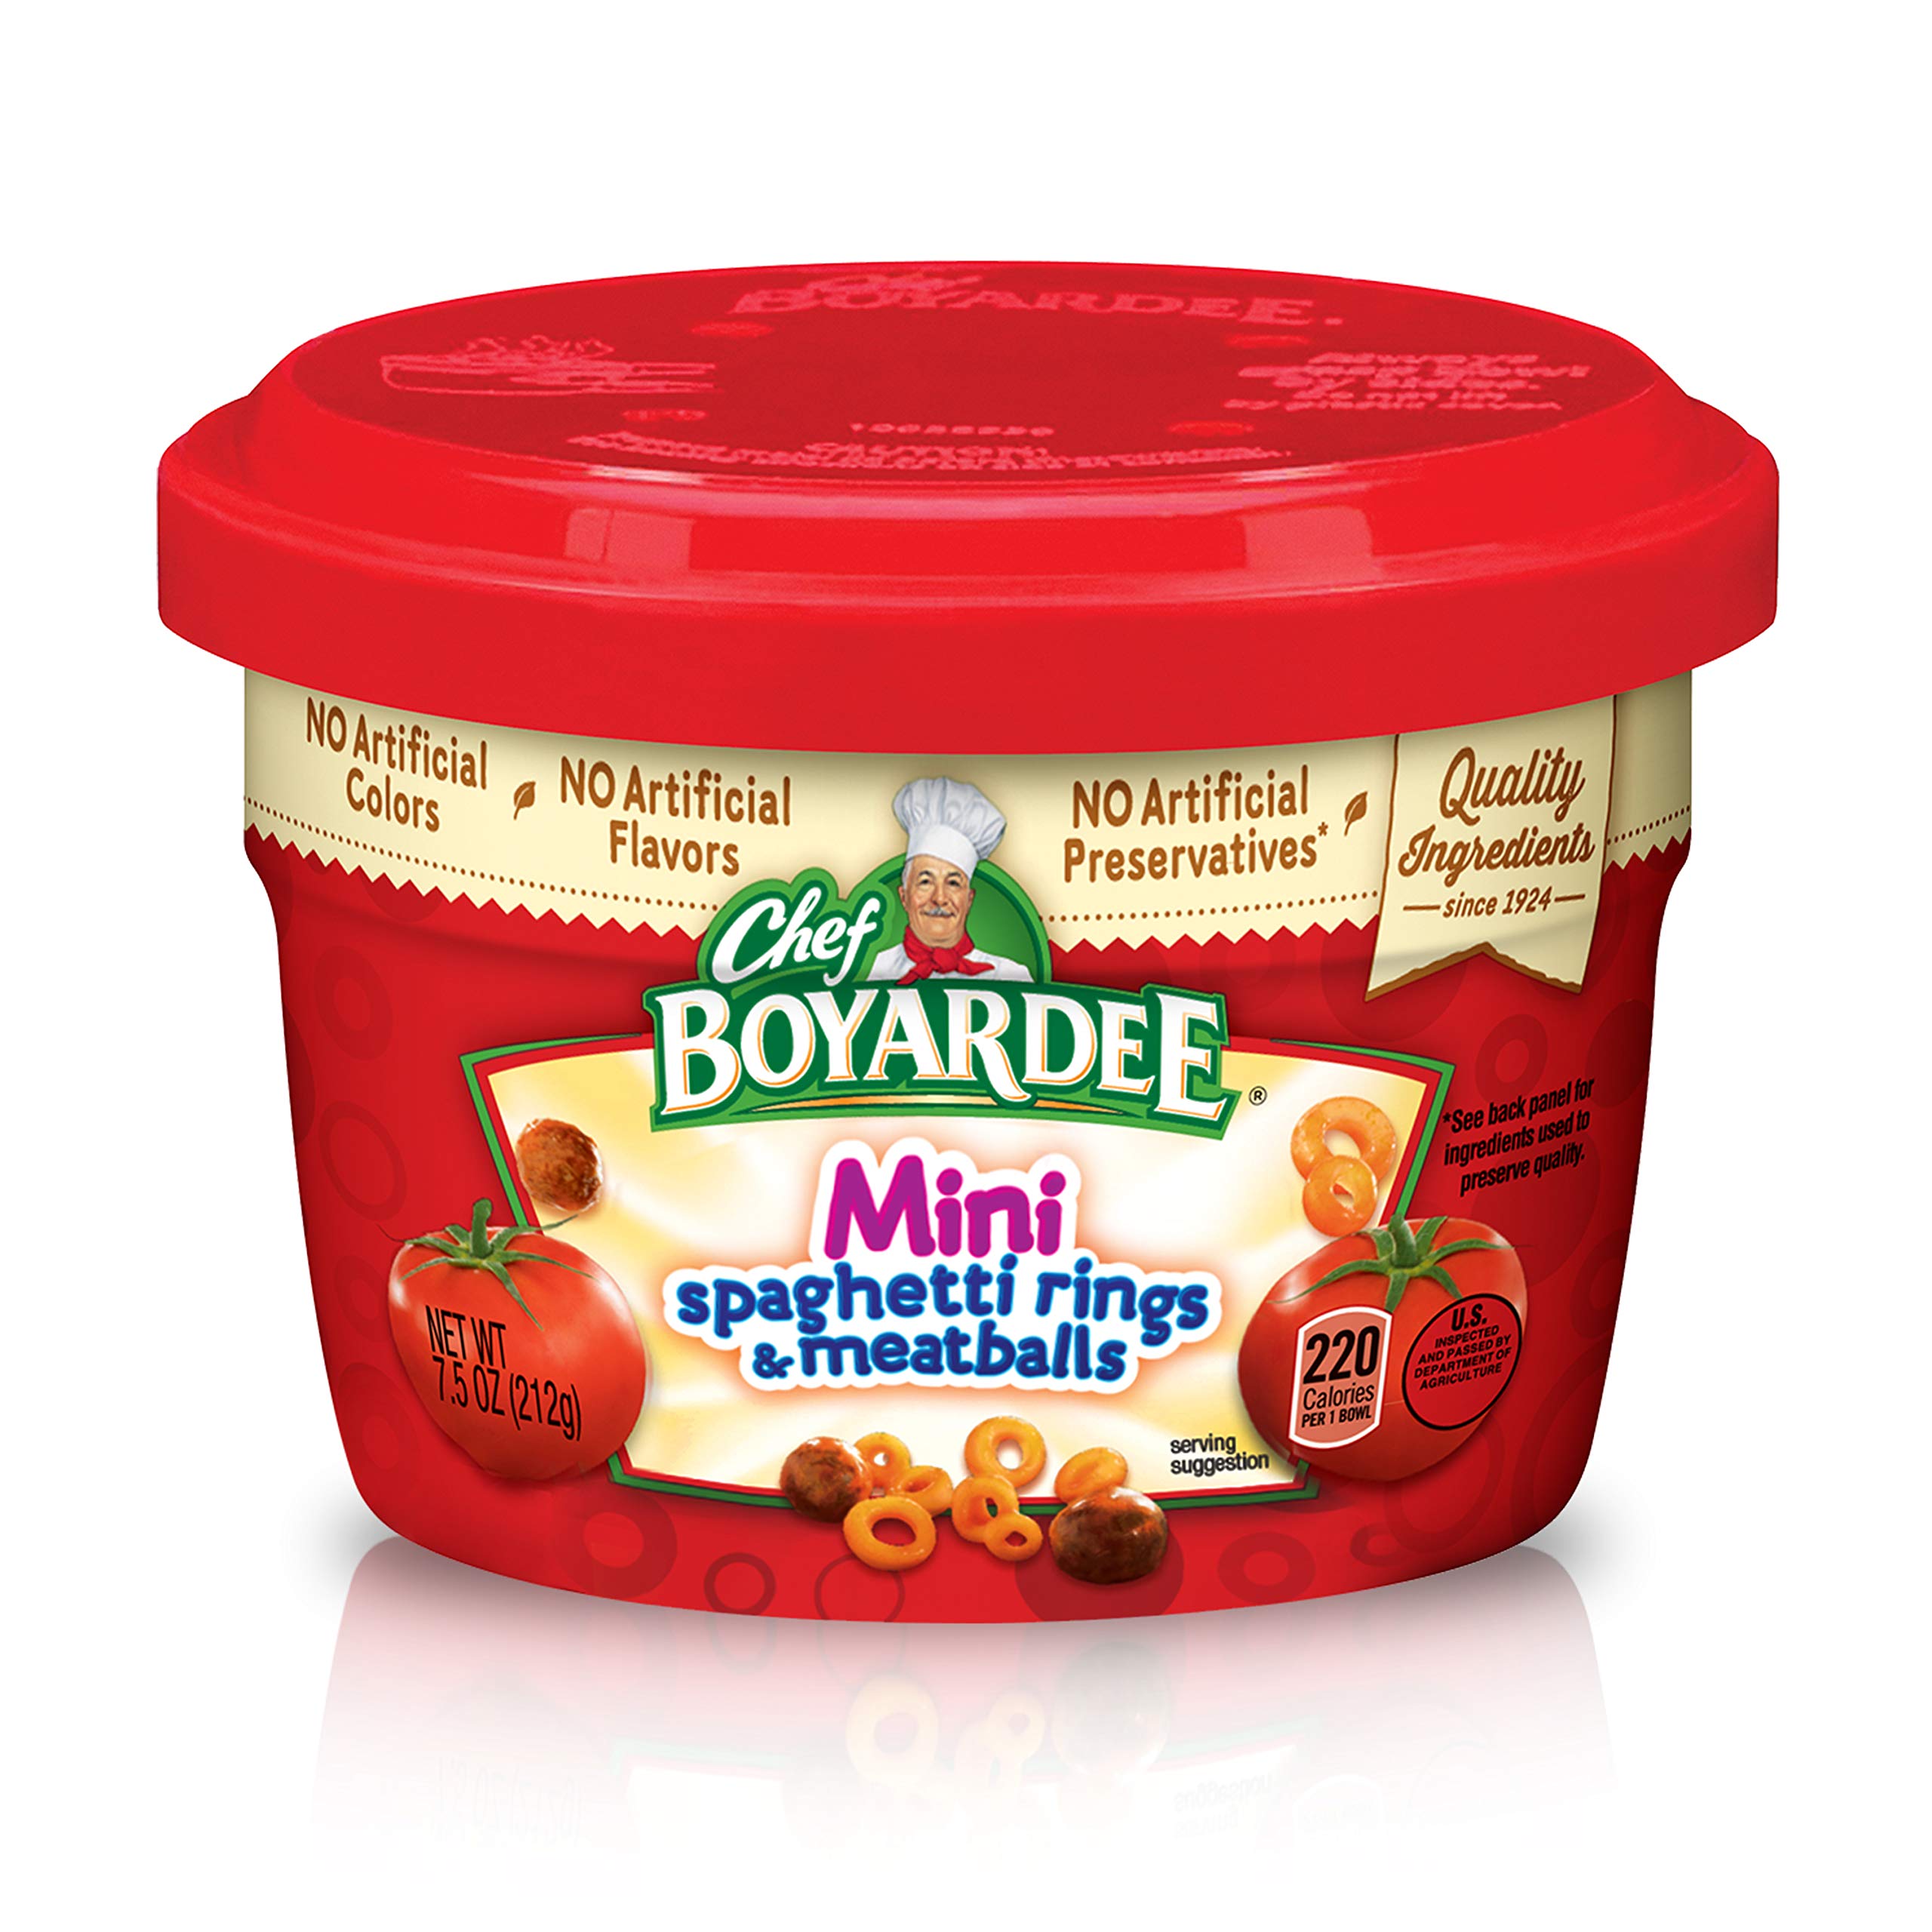 12-Pack 7.5-Oz Chef Boyardee Mini Spaghetti Rings & Meatballs Microwavable Bowls $9.42 w/ S&S + Free Shipping w/ Prime or on orders over $35